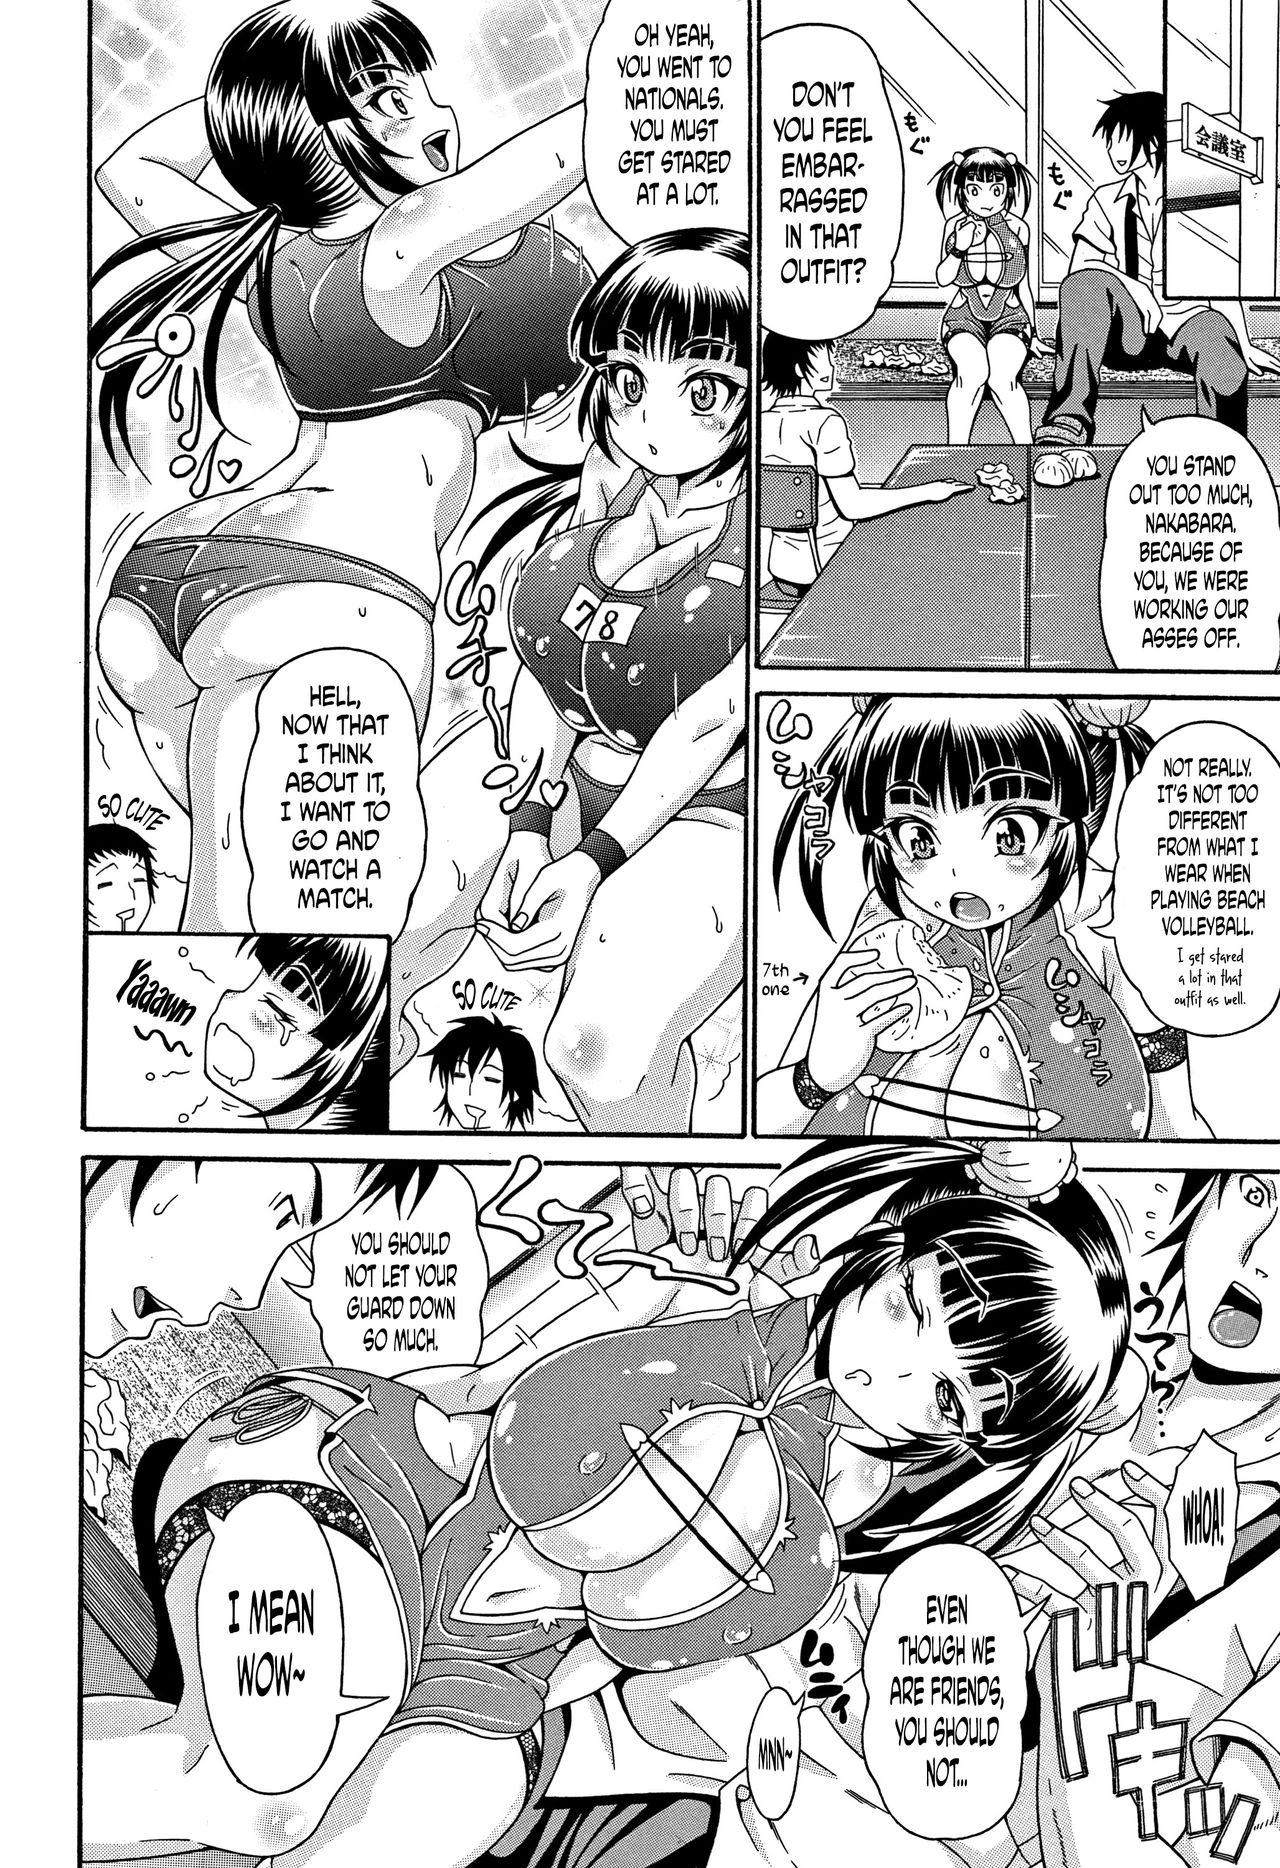 [Andou Hiroyuki] Mamire Chichi - Sticky Tits Feel Hot All Over. Ch.1-6 [English] [doujin-moe.us] 92